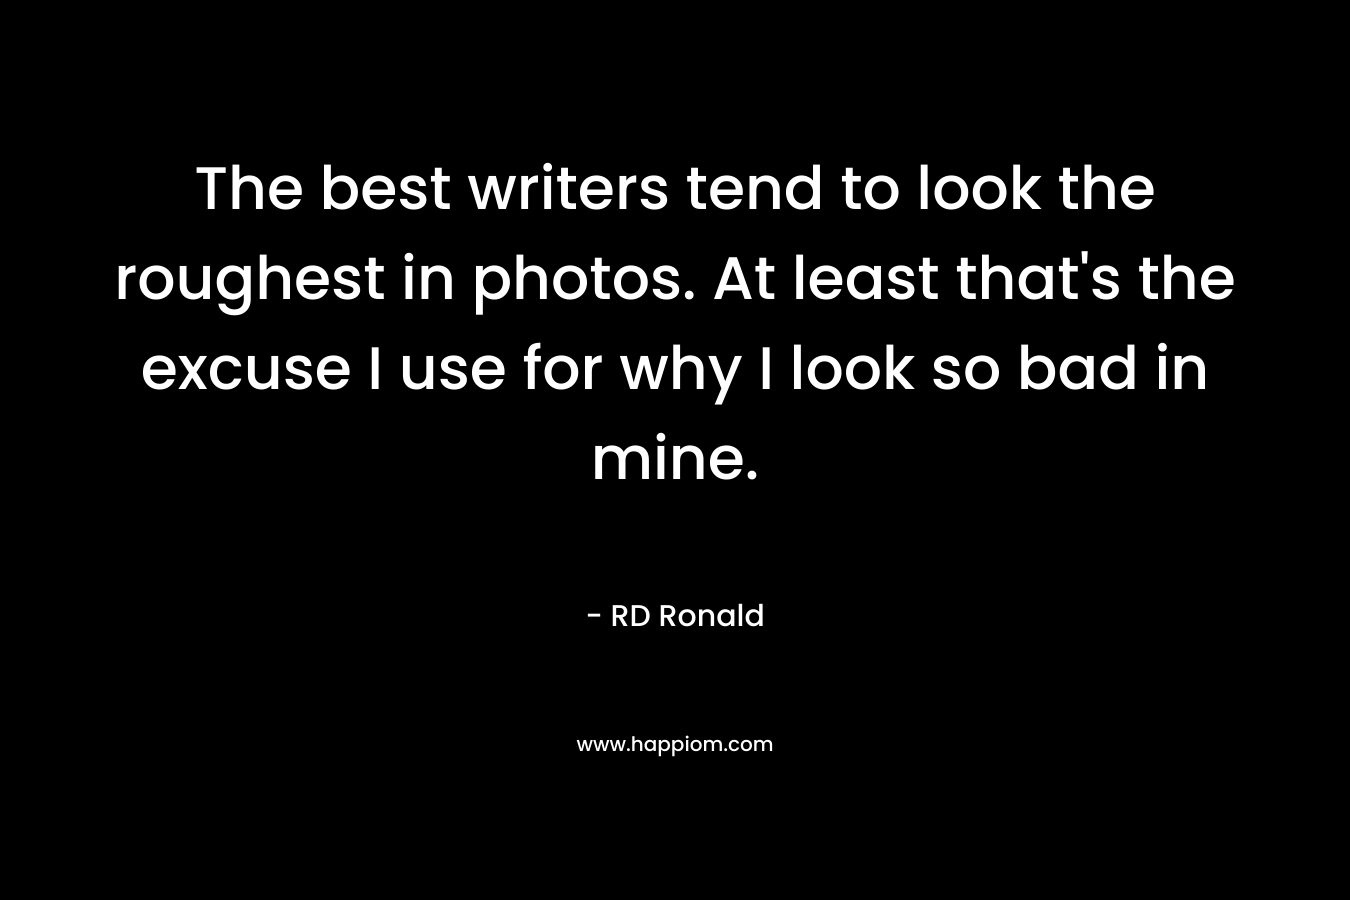 The best writers tend to look the roughest in photos. At least that’s the excuse I use for why I look so bad in mine. – RD Ronald